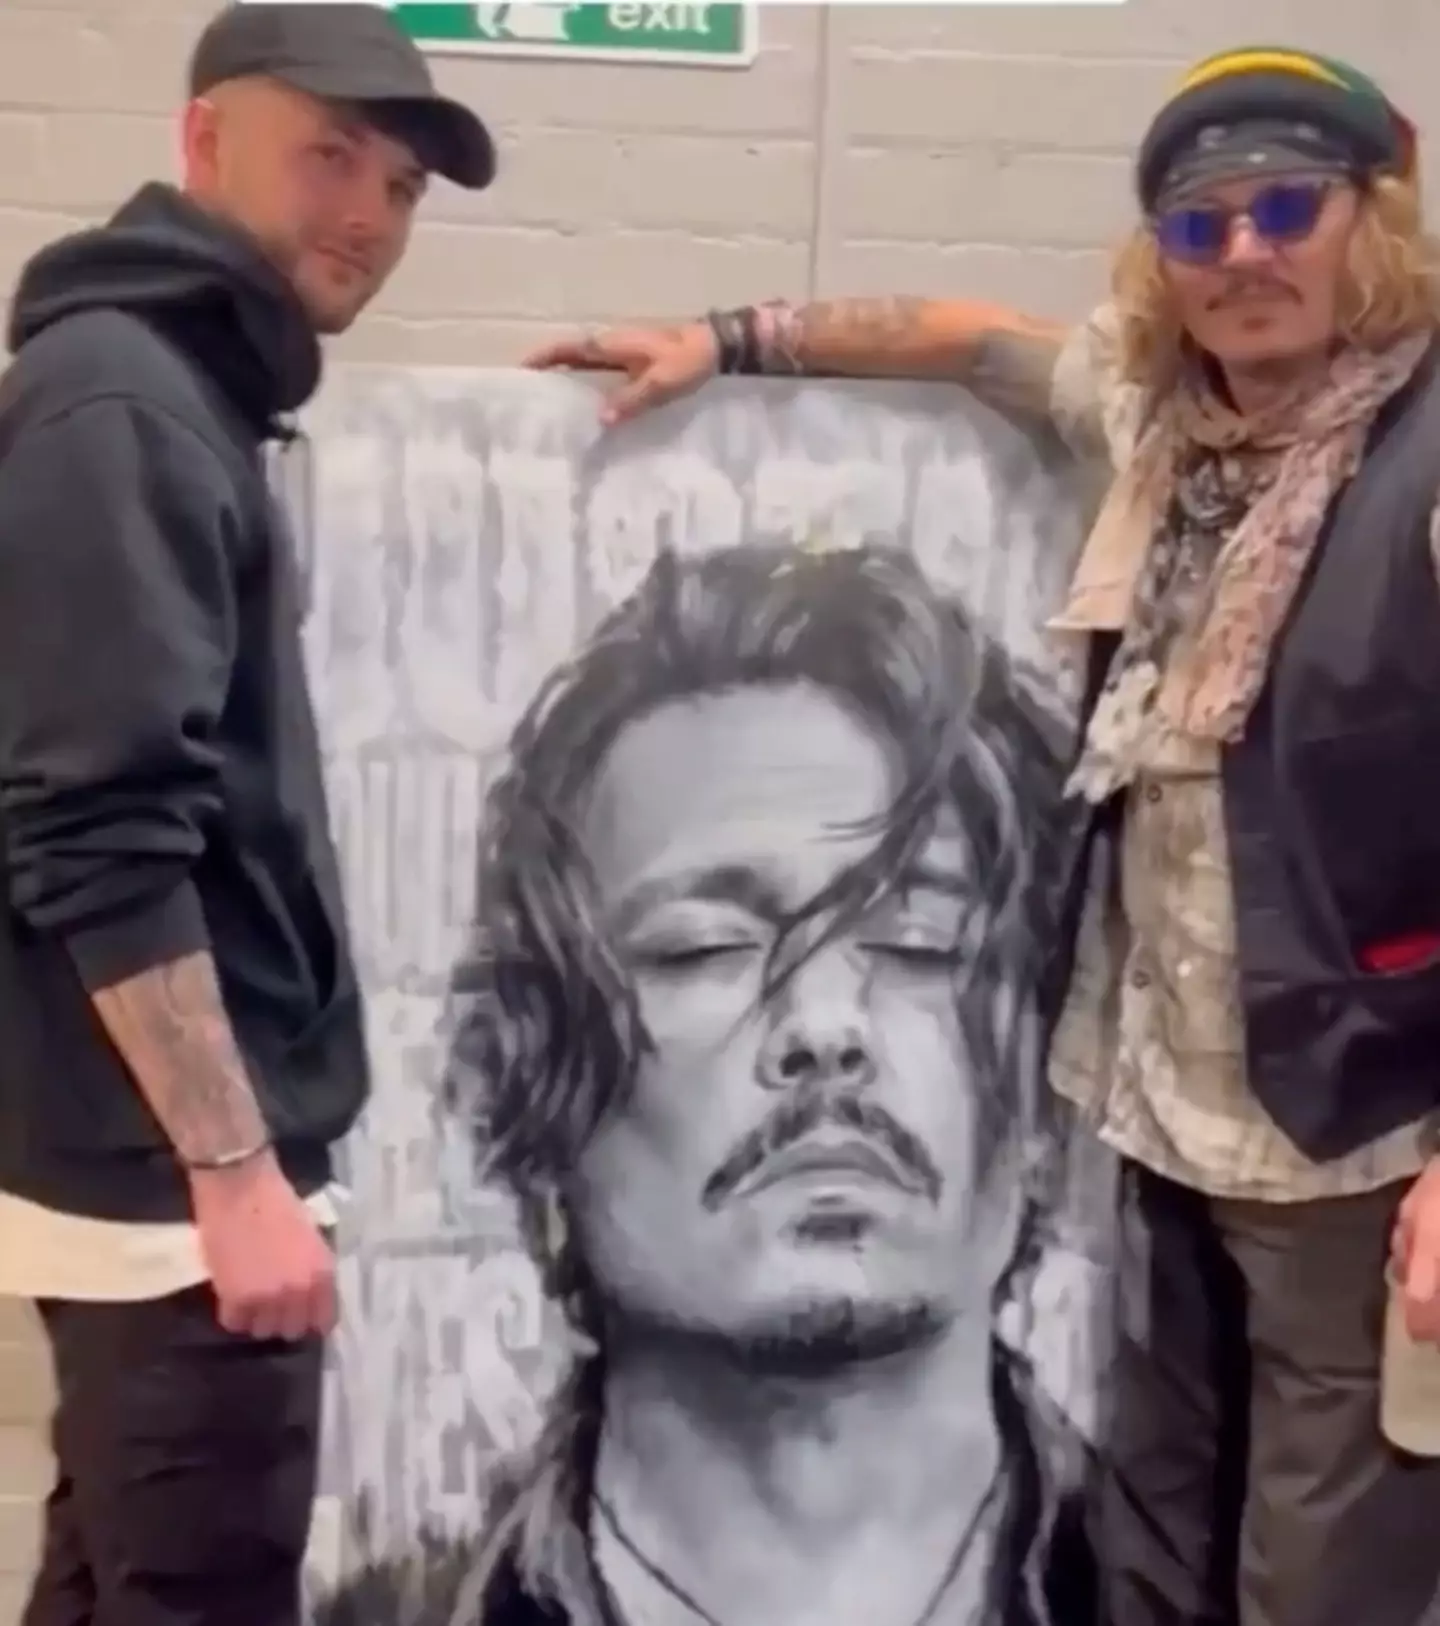 Johnny Depp thanked fans after he was handed a painting.